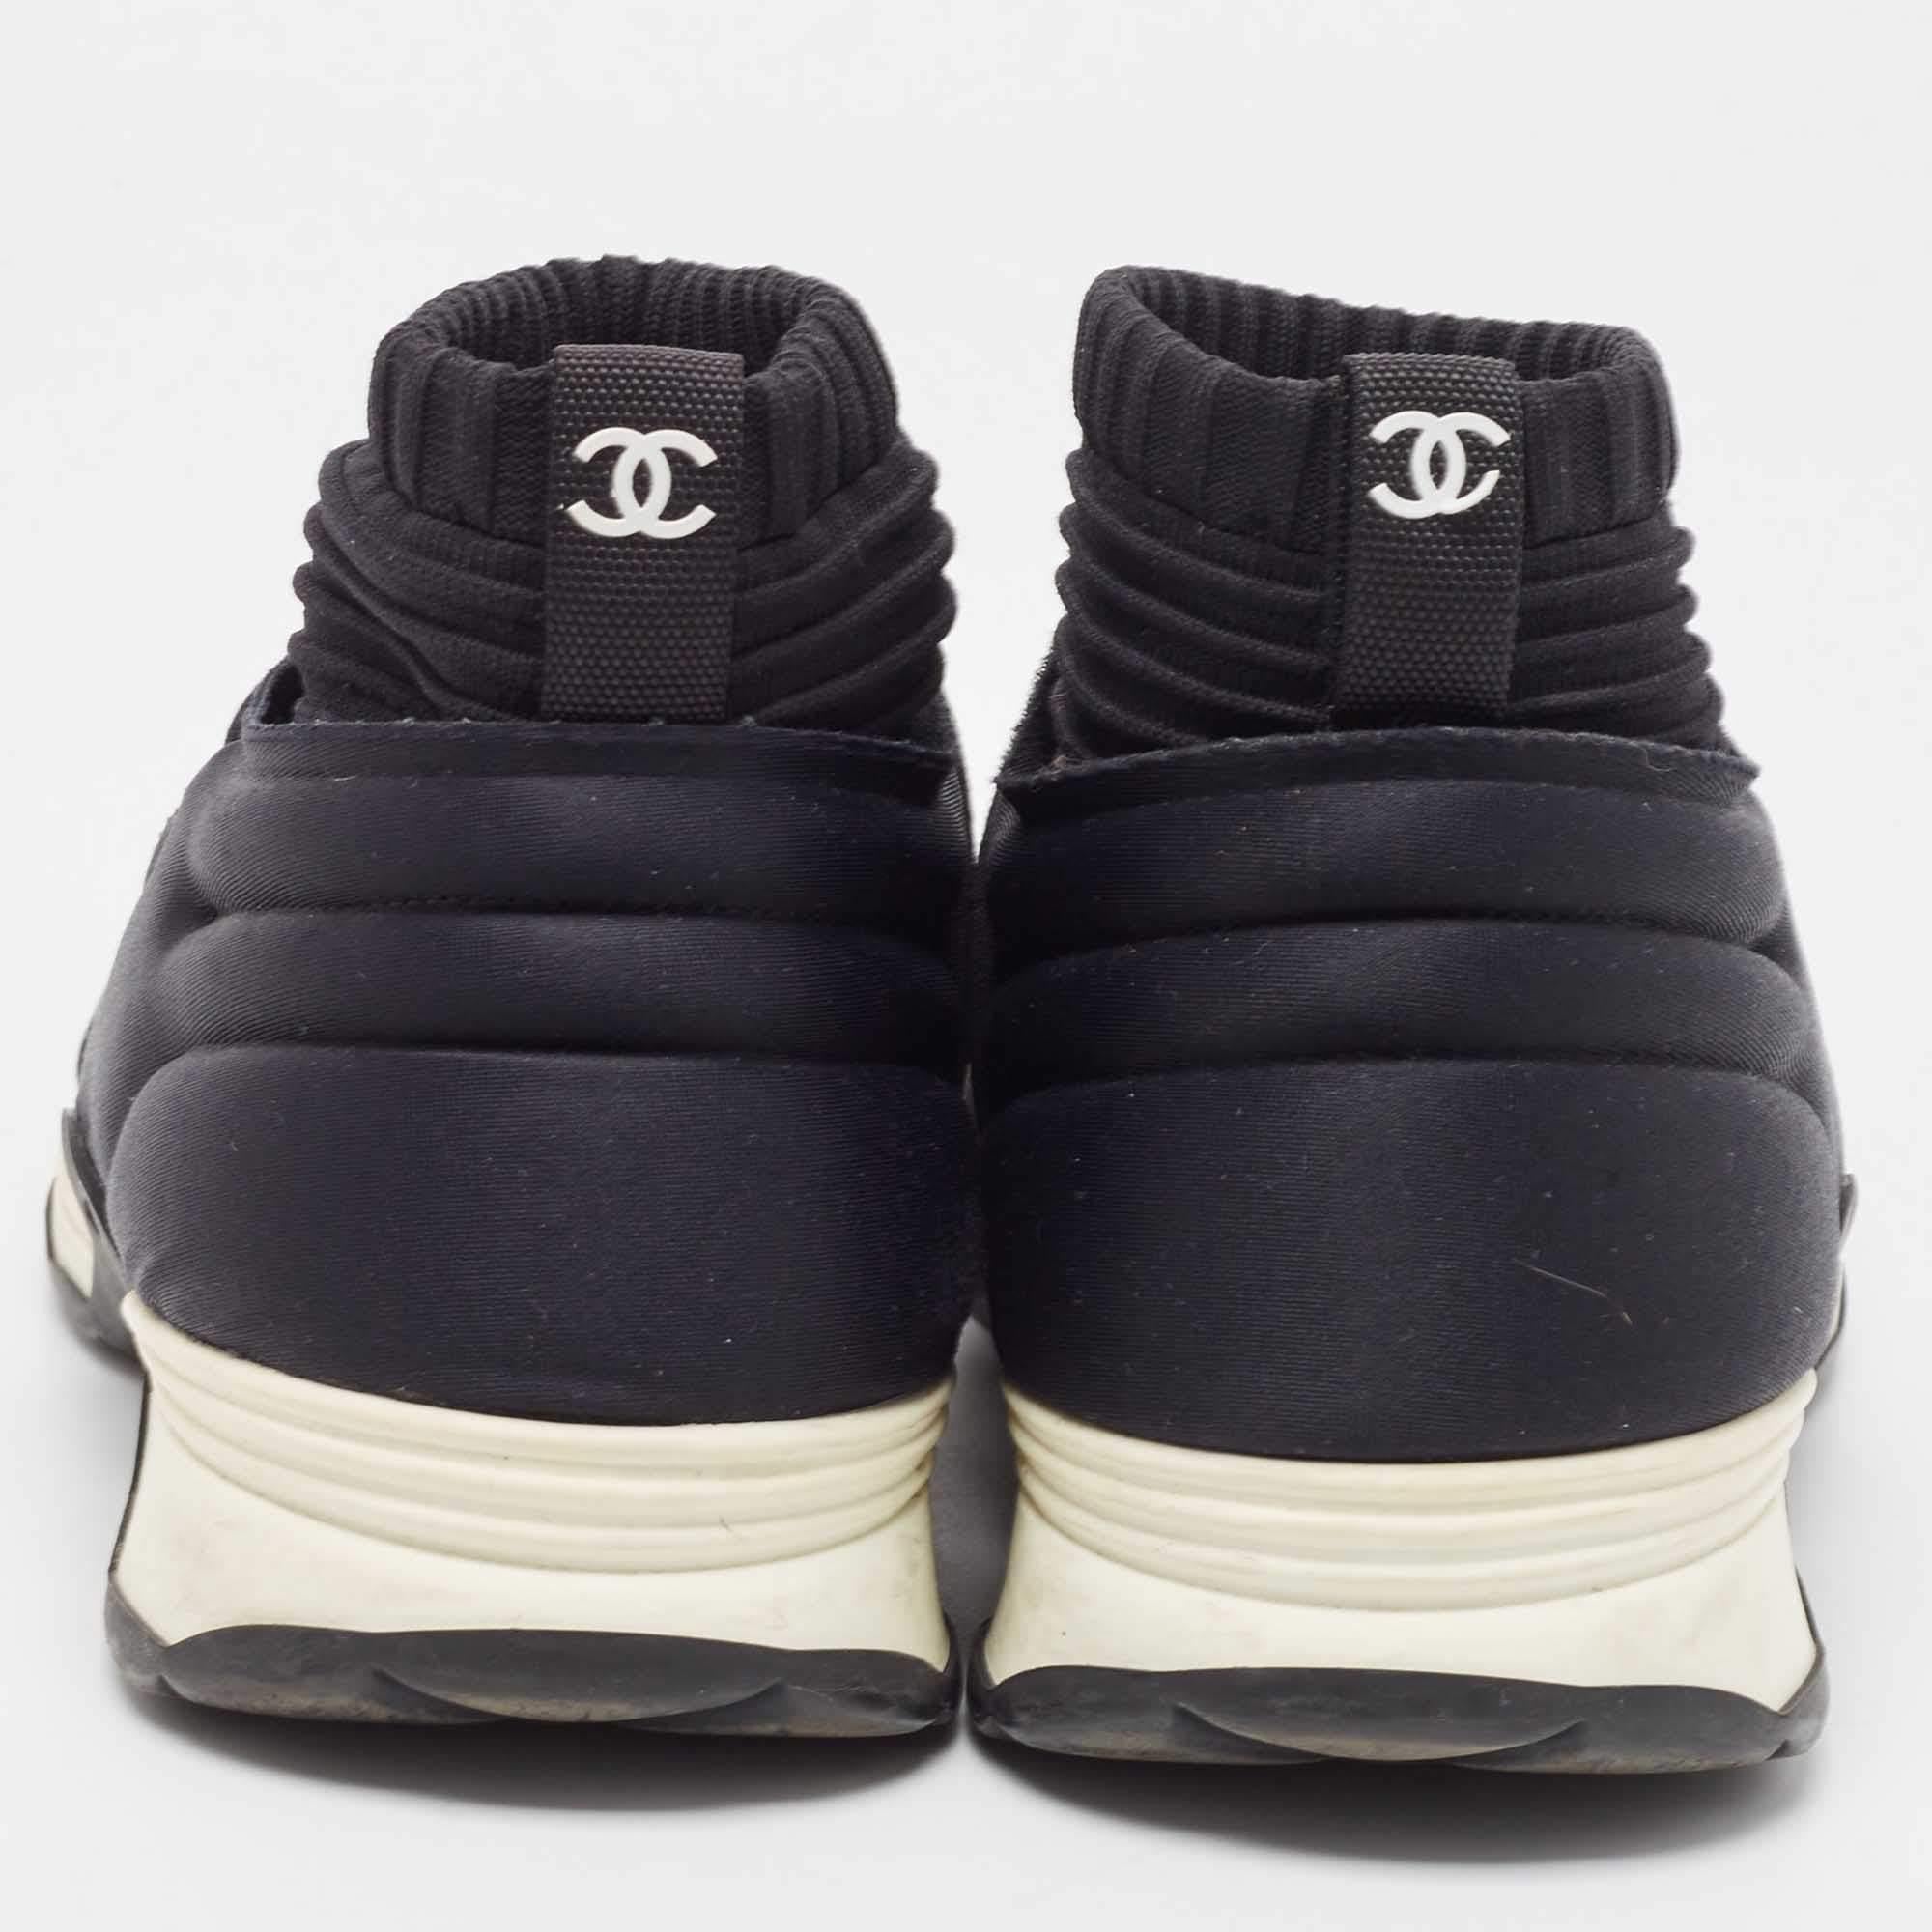 Chanel Black Knit Fabric CC Slip On Sneakers Size 39 For Sale 1